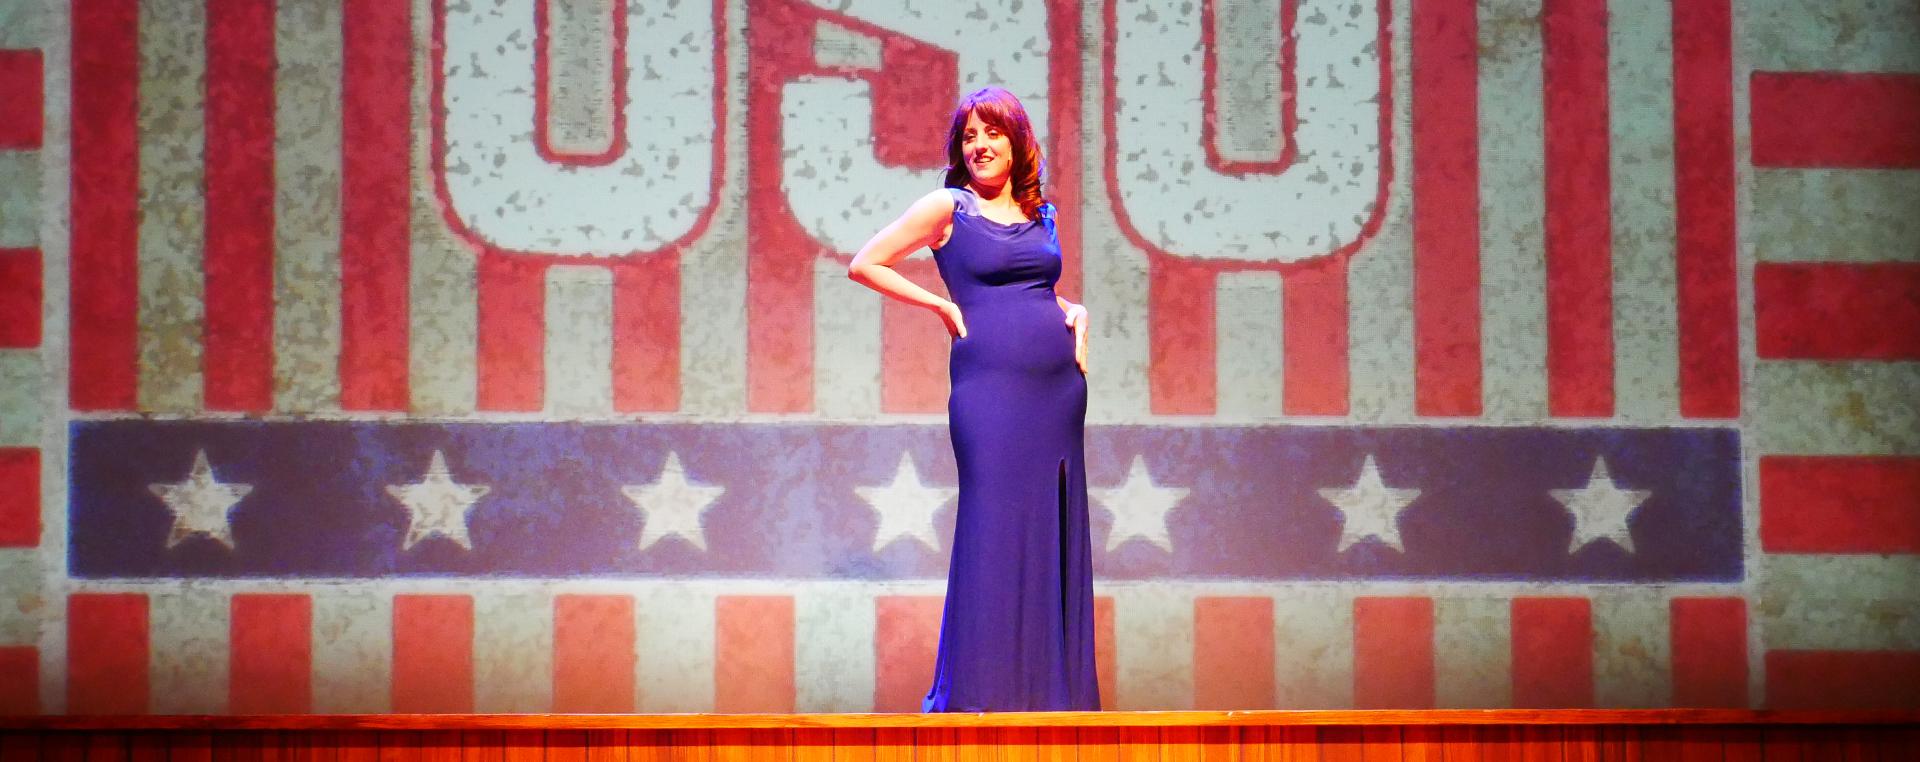 woman on stage in front of American flag backdrop